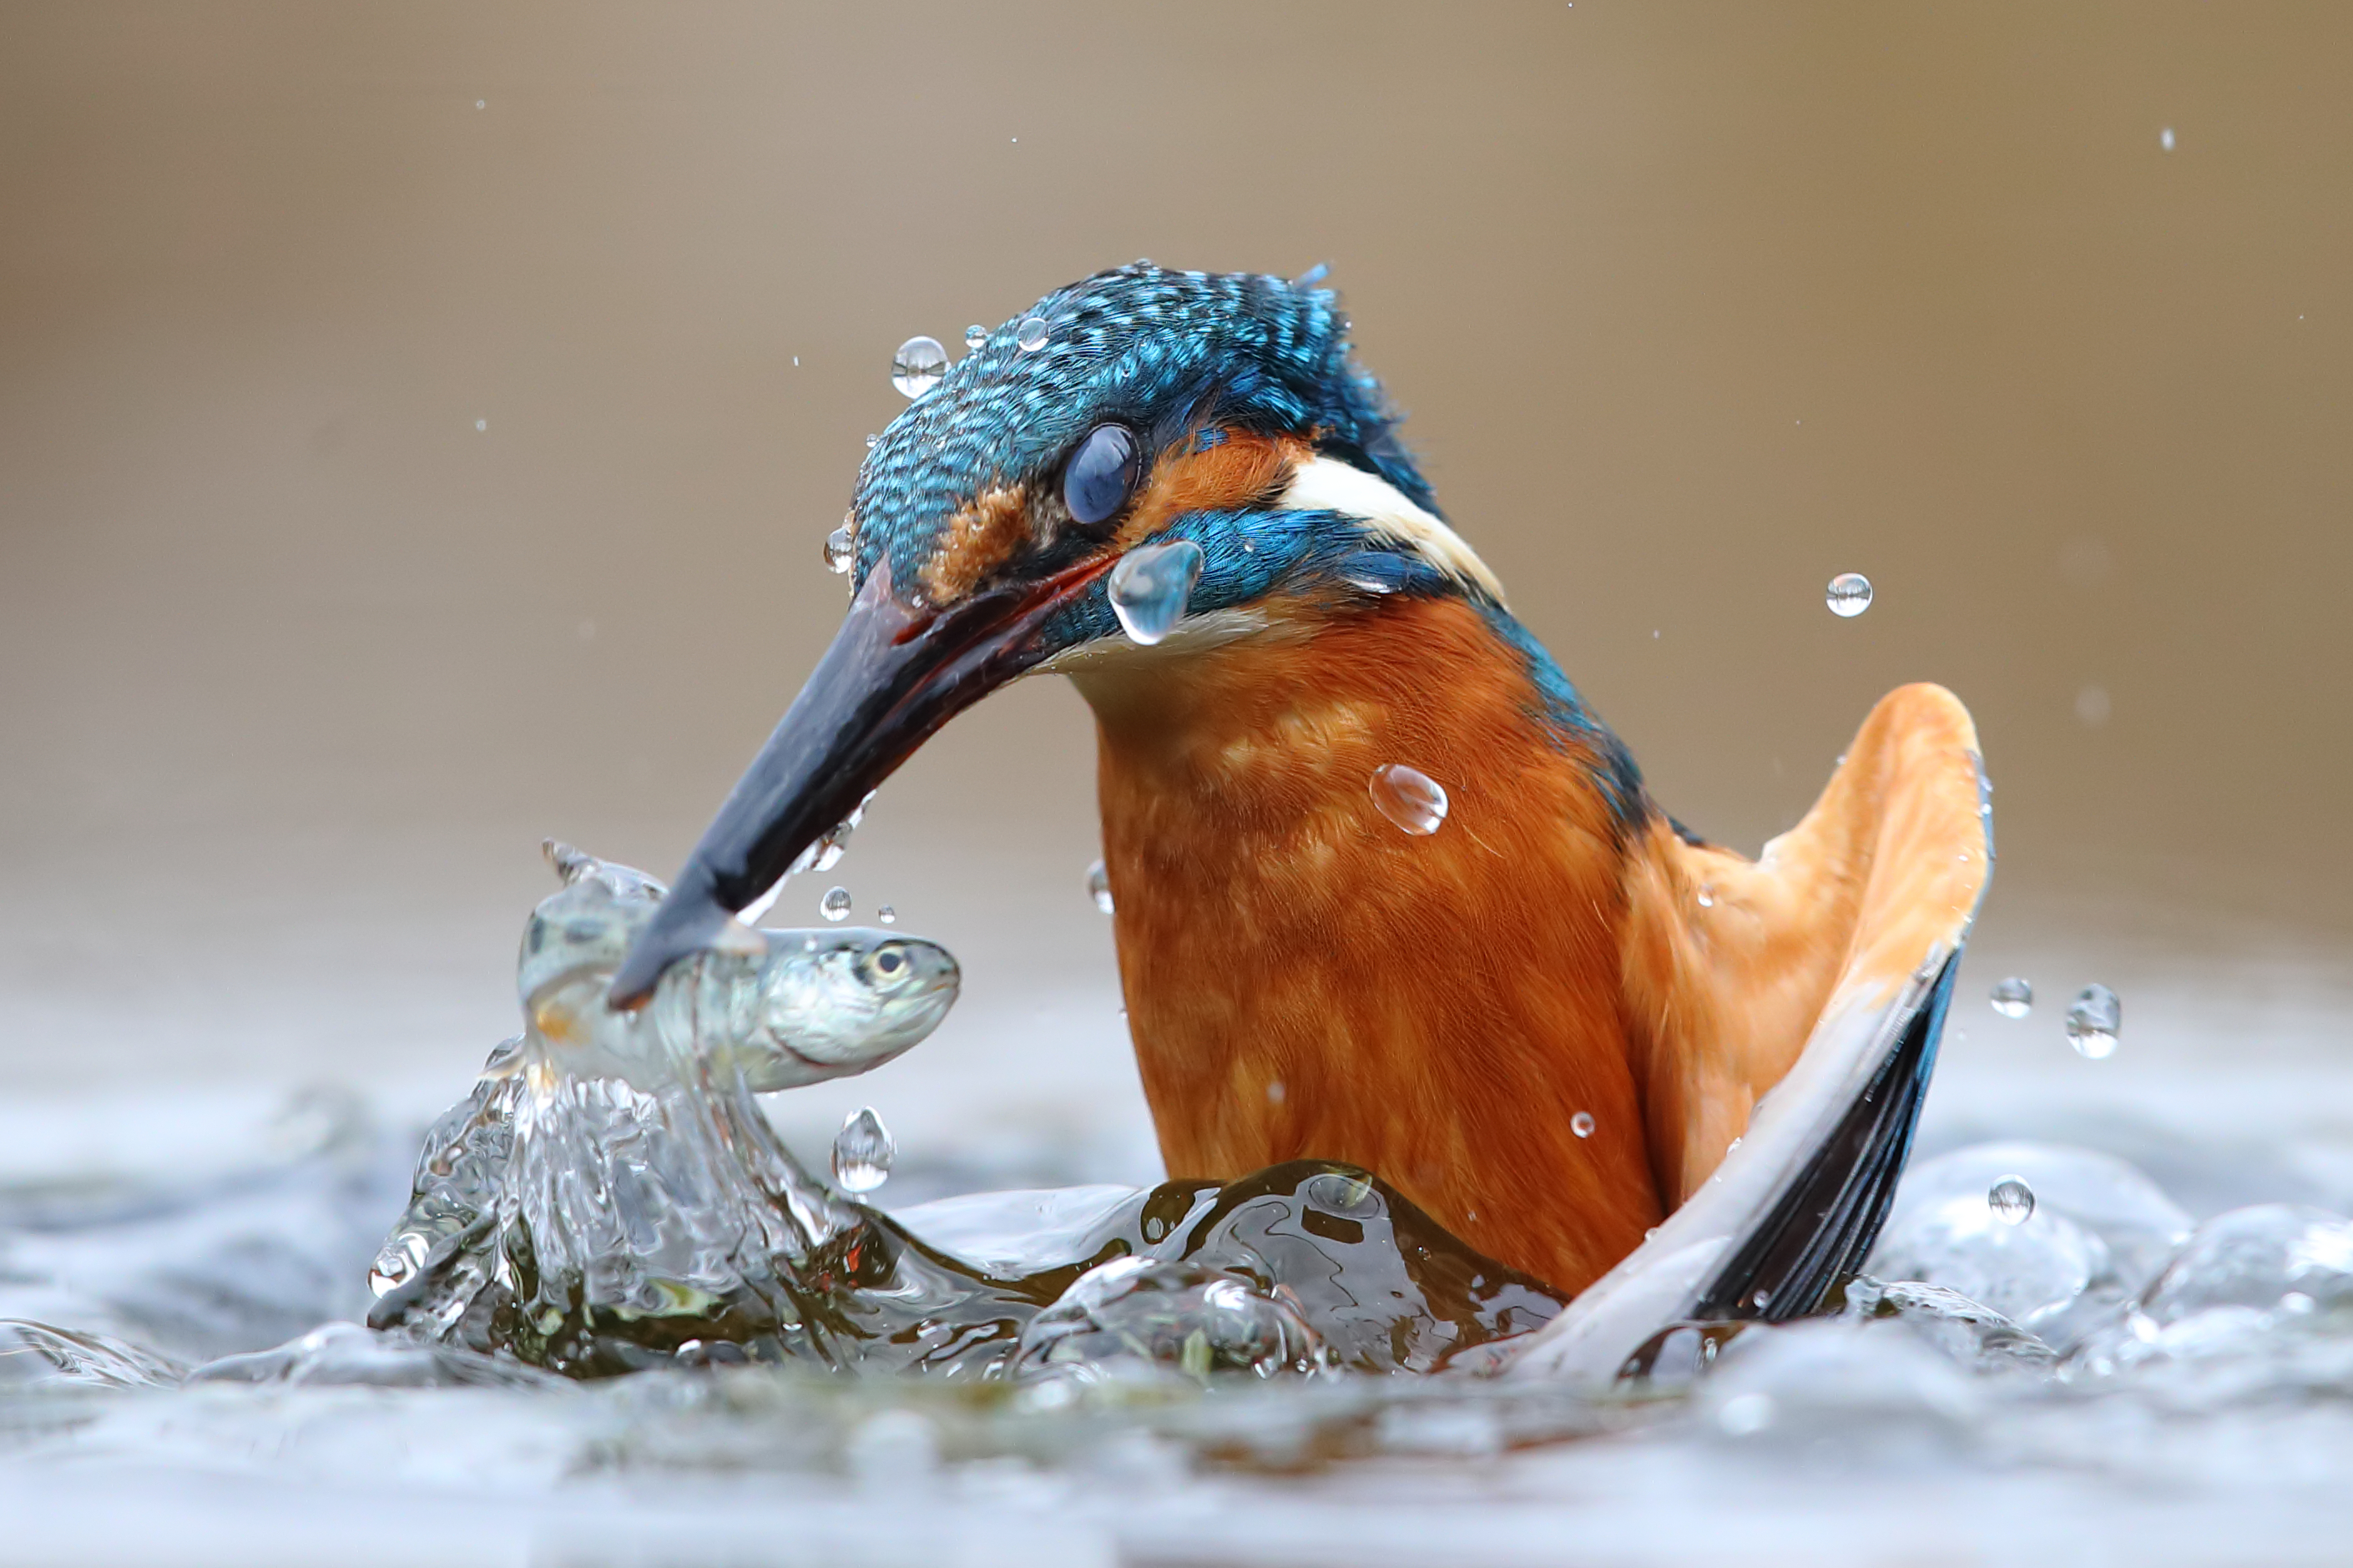 A common kingfisher (Alcedo atthis) hunting in water by Luca Casale